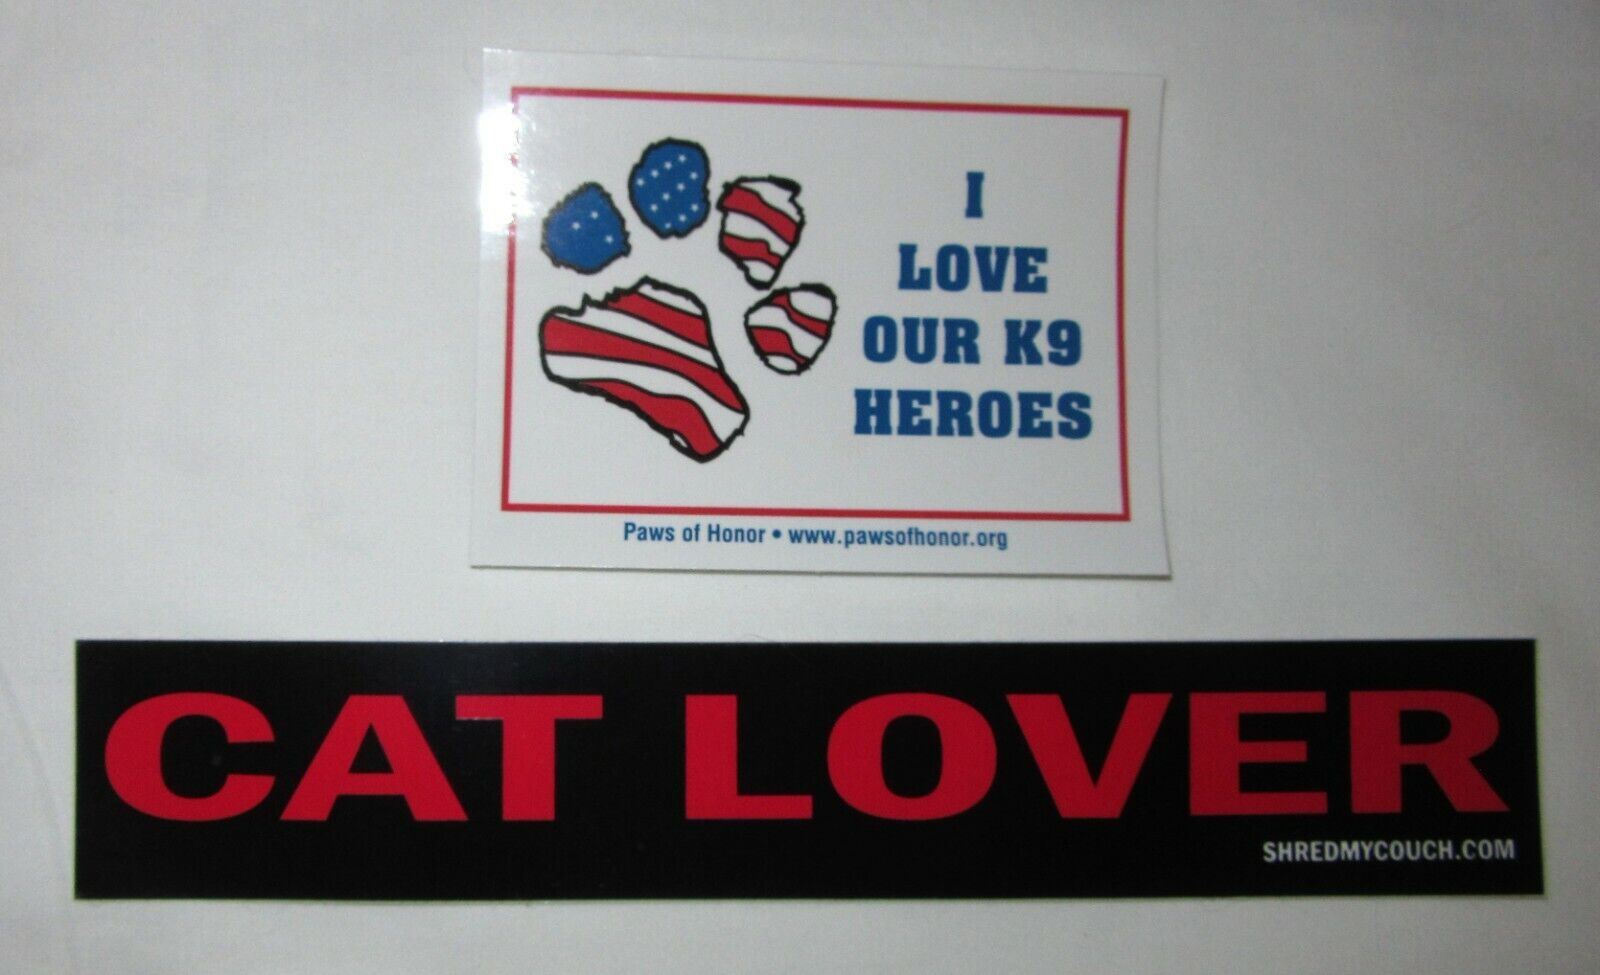 Cat Lover & K9 Heroes sticker pair new unused FREE SHIPPING in the US Shredmycouch